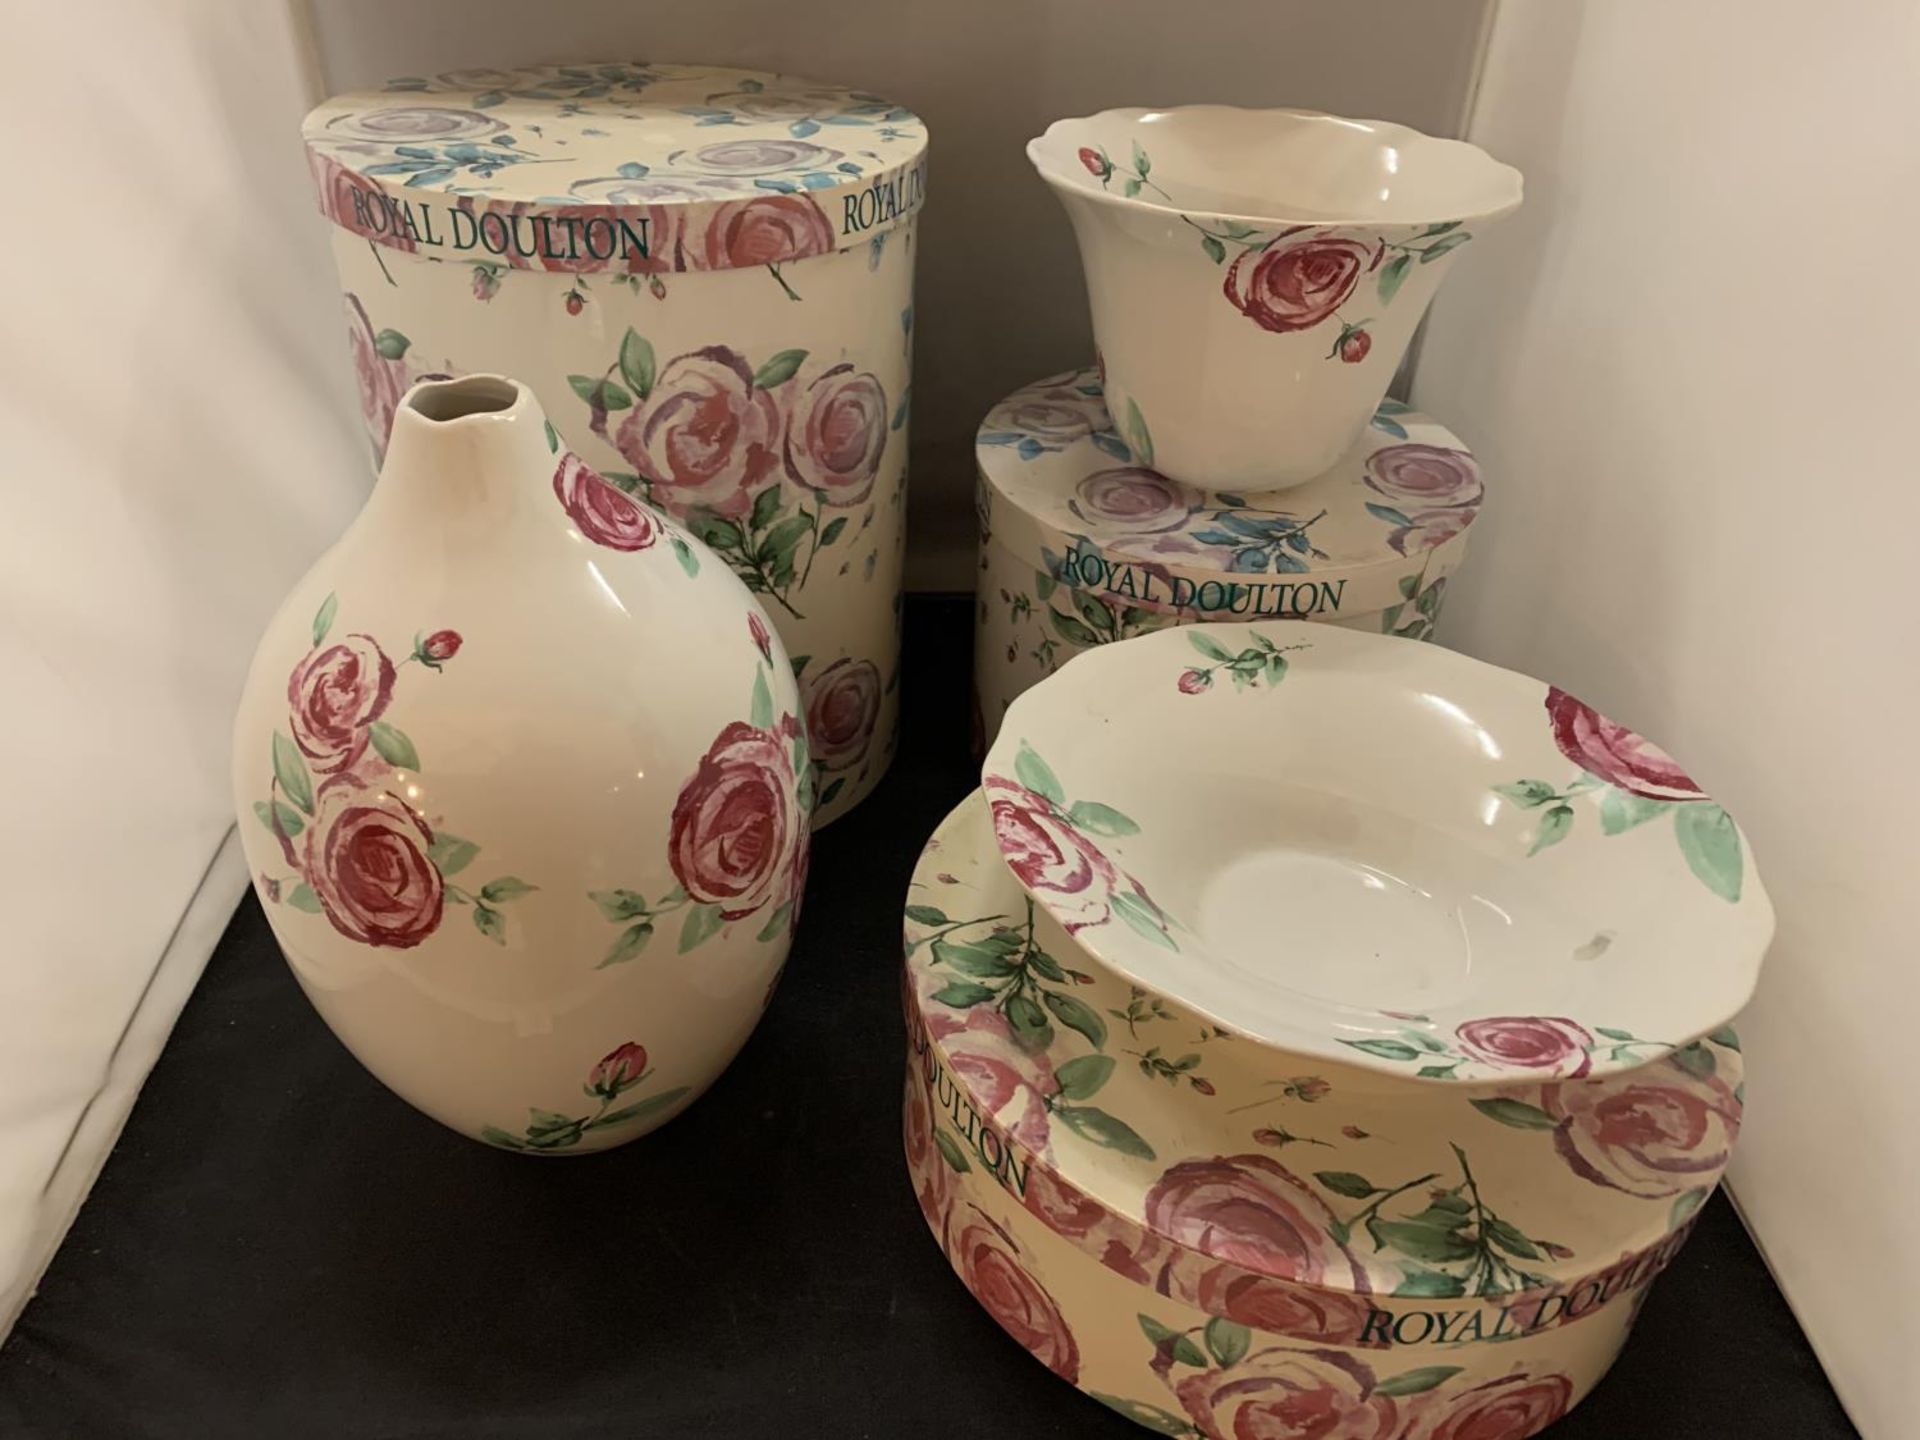 THREE VARIOUS ROYAL DOULTON ROSE CLOUDS ITEMS WITH PRESENTATION BOXES TO INCLUDE A VASE, PLANTER AND